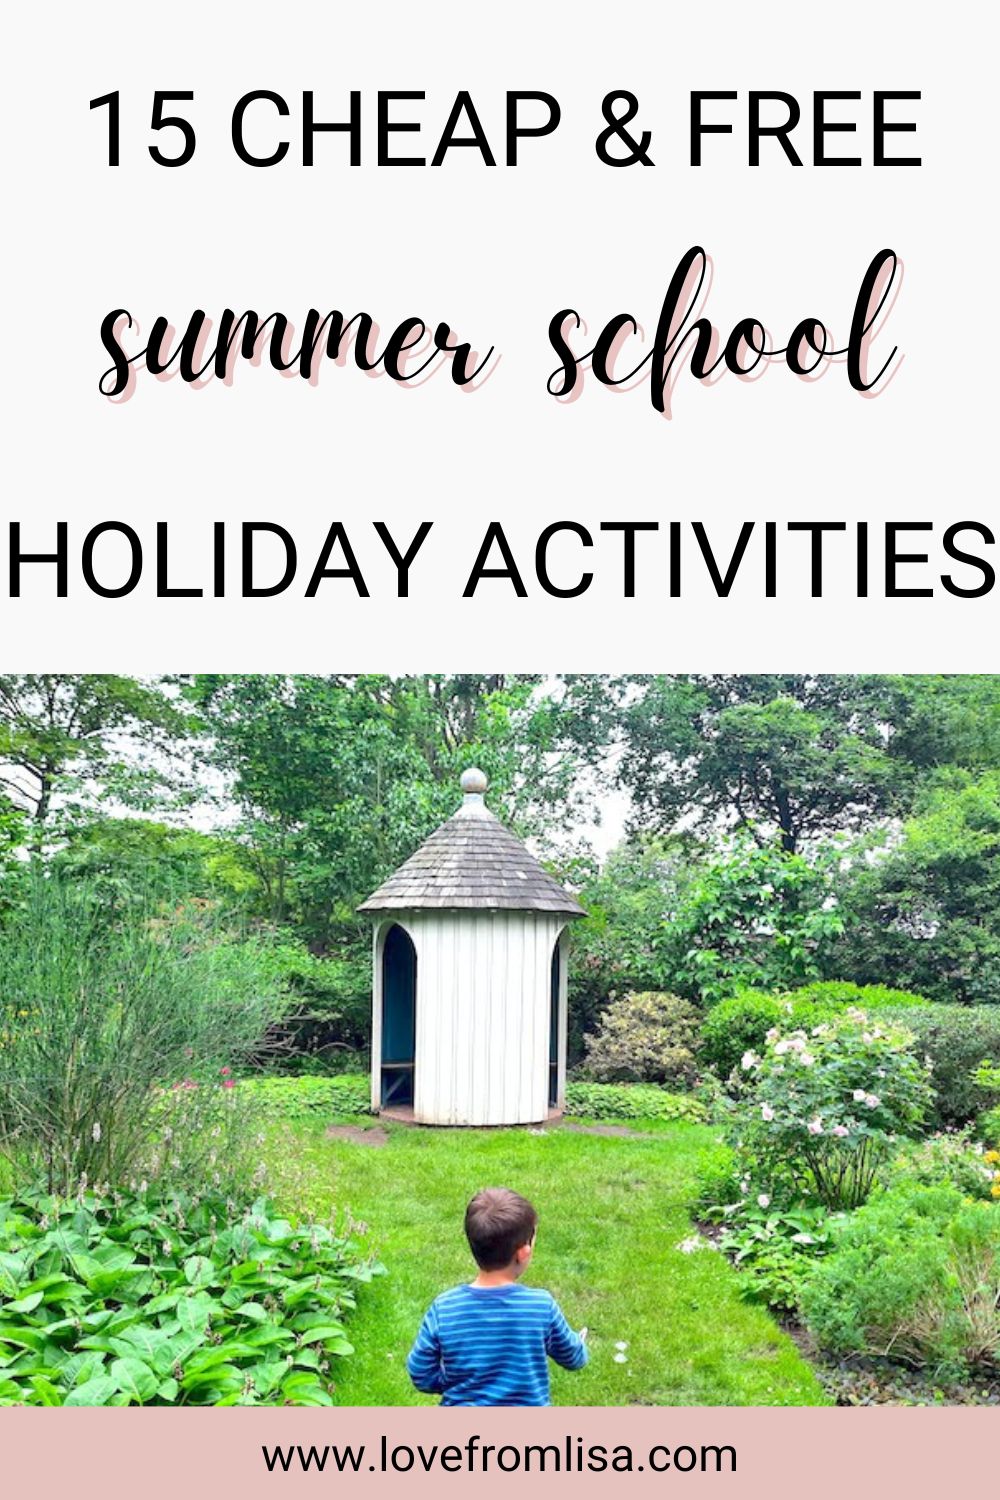 15 cheap and free summer school holiday activities Pinterest